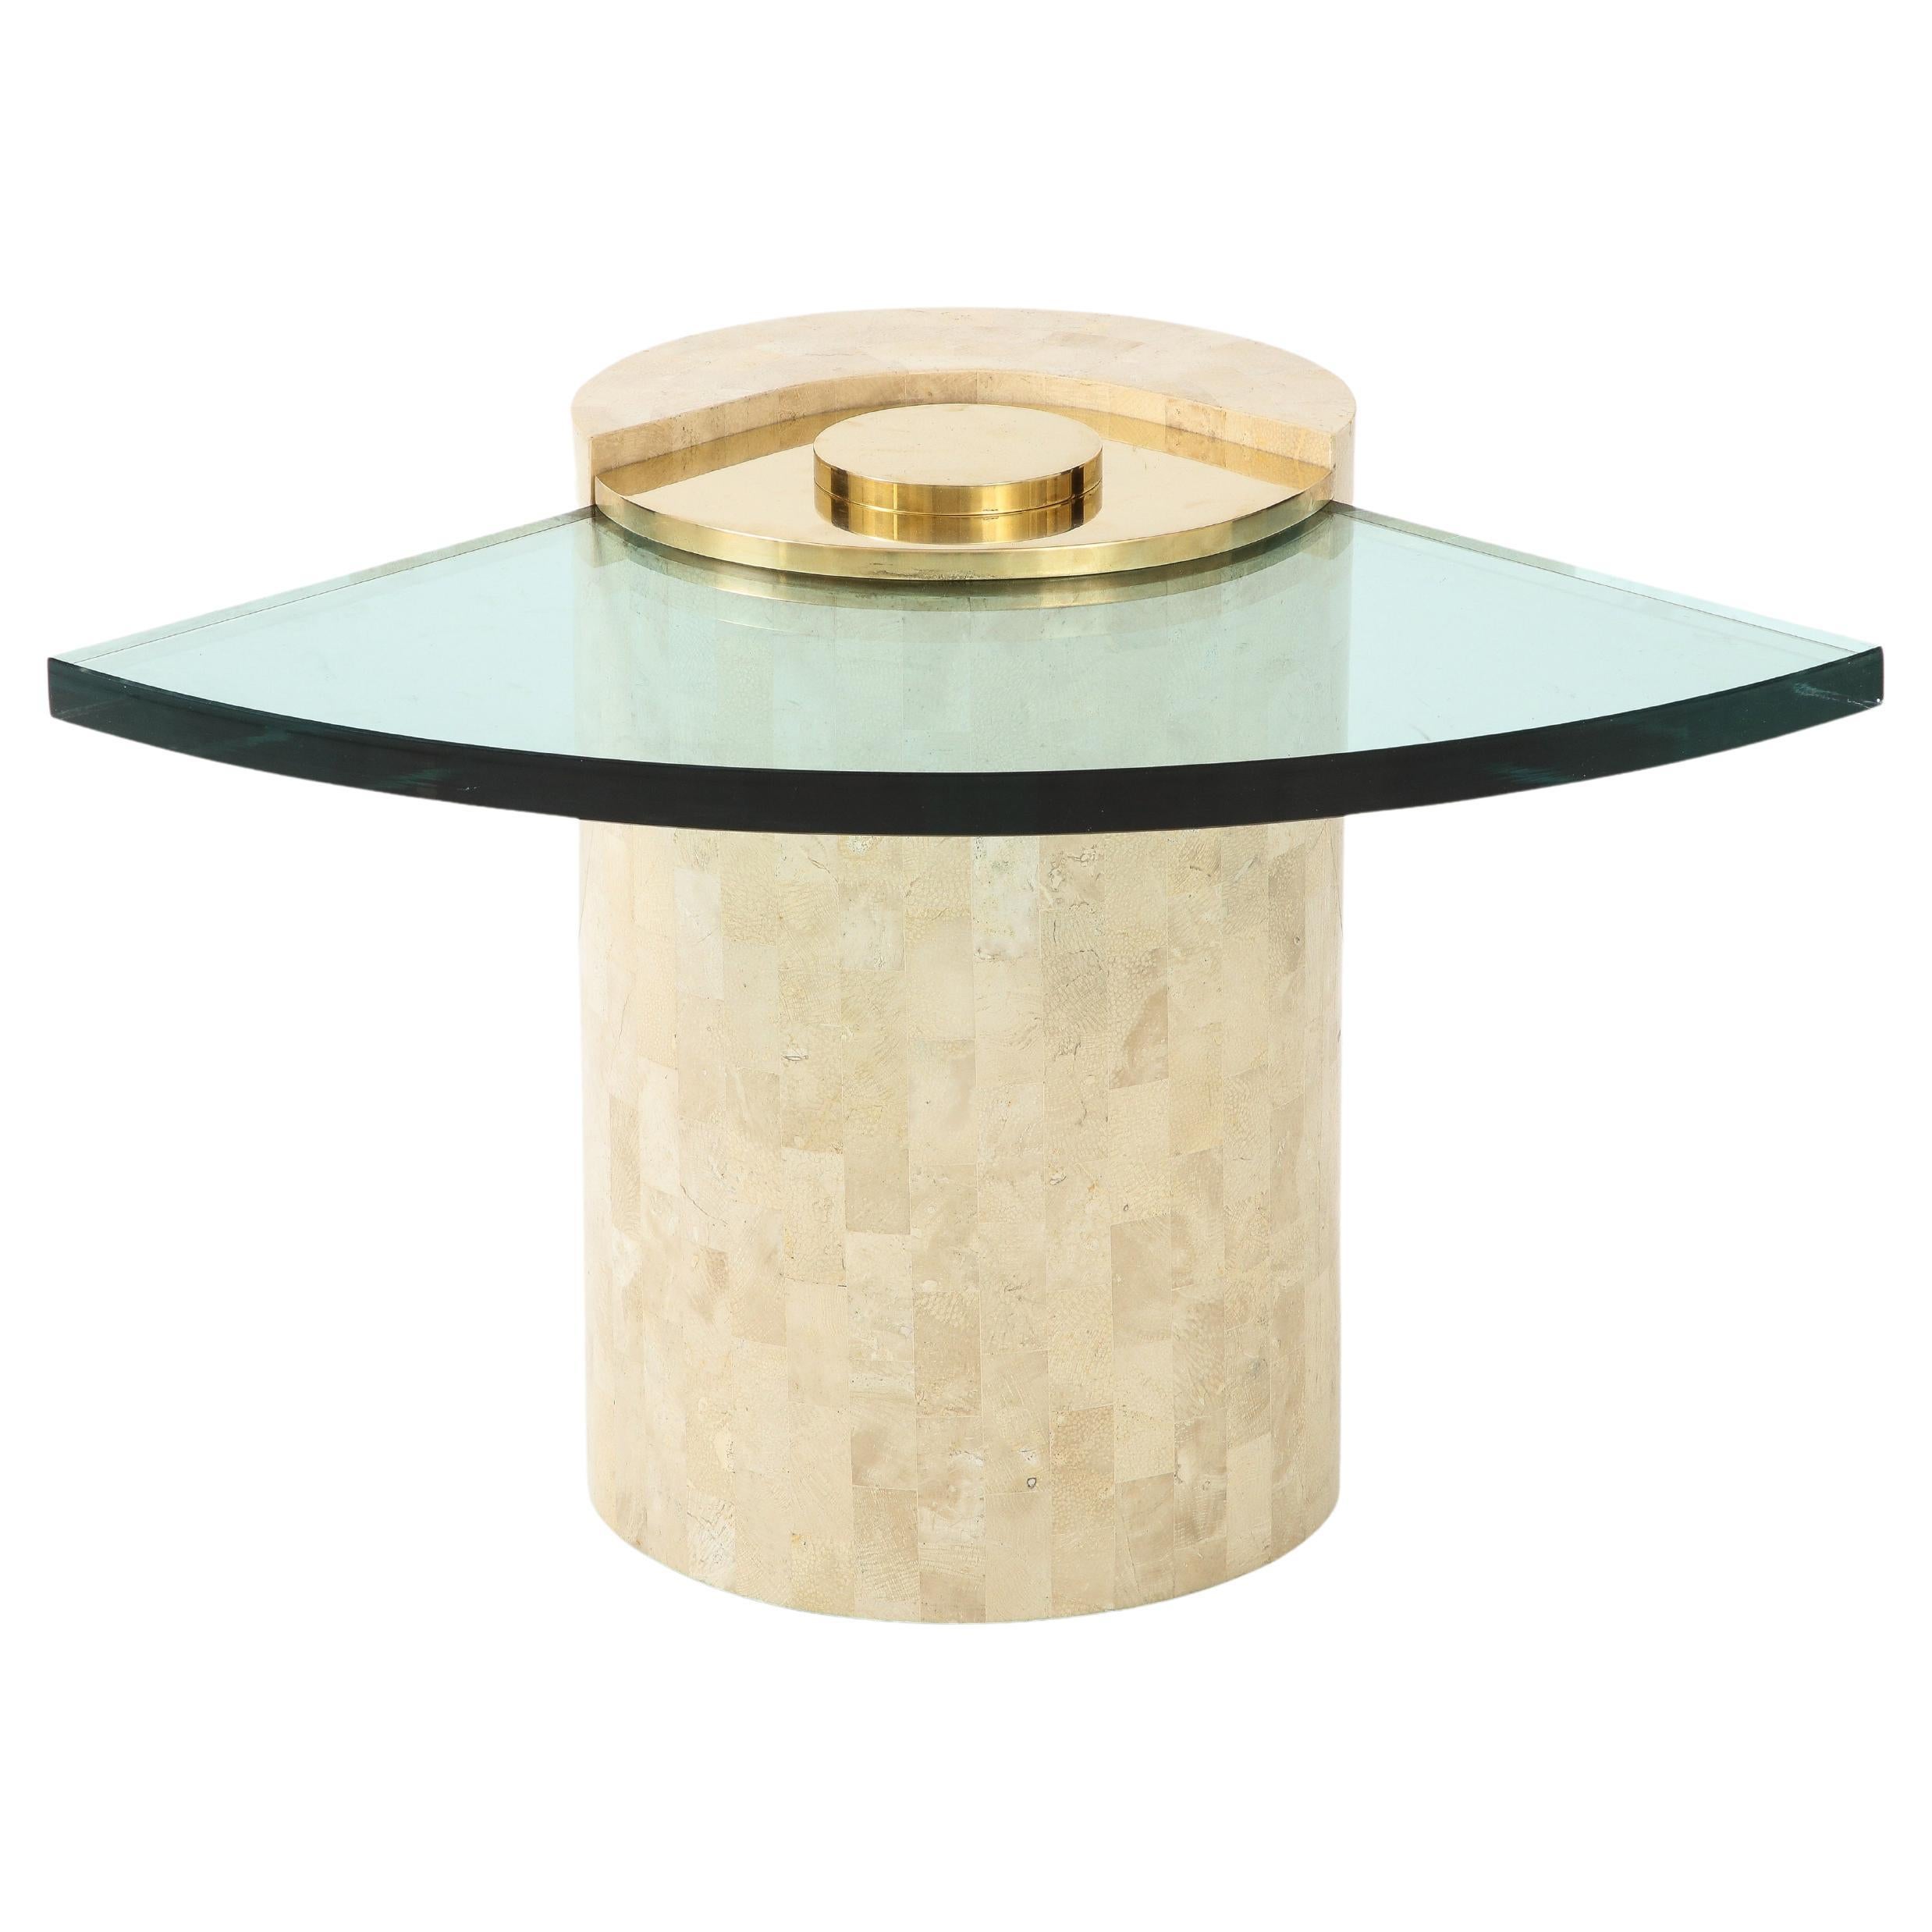 Karl Springer "Sculpture Leg" Table in Coral, Brass and Glass, USA, 1980s For Sale